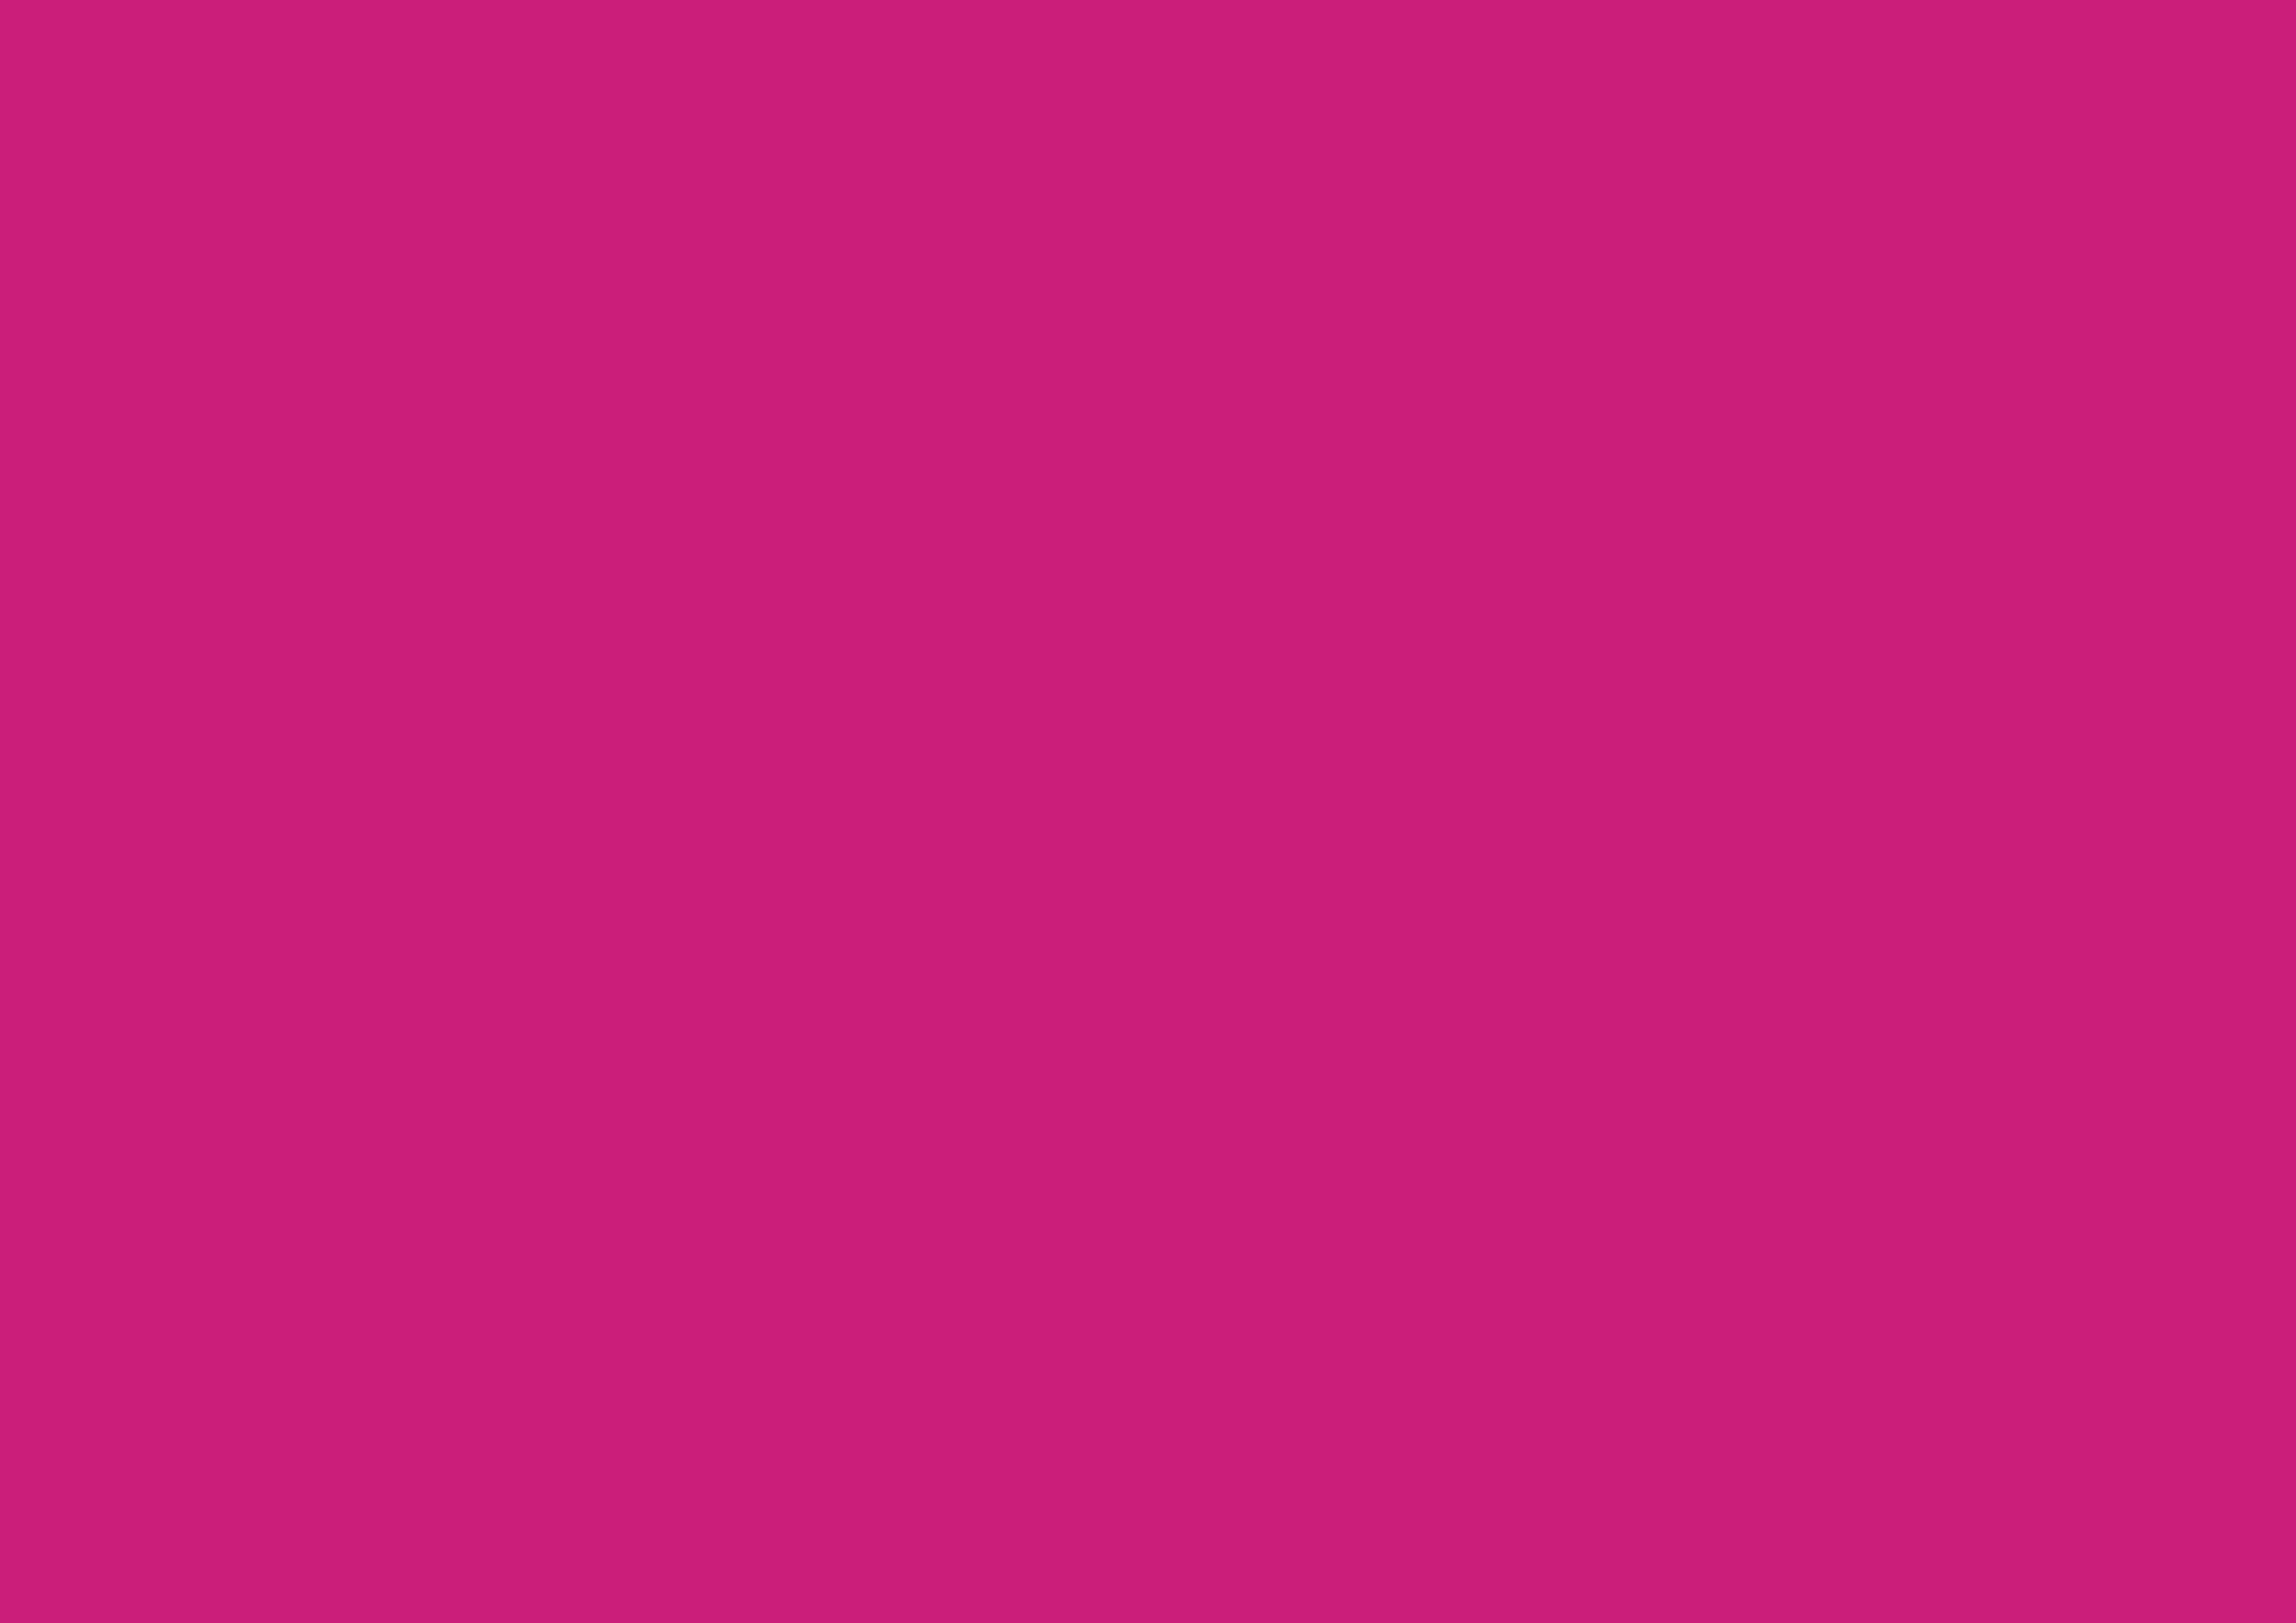 3508x2480 Magenta Dye Solid Color Background